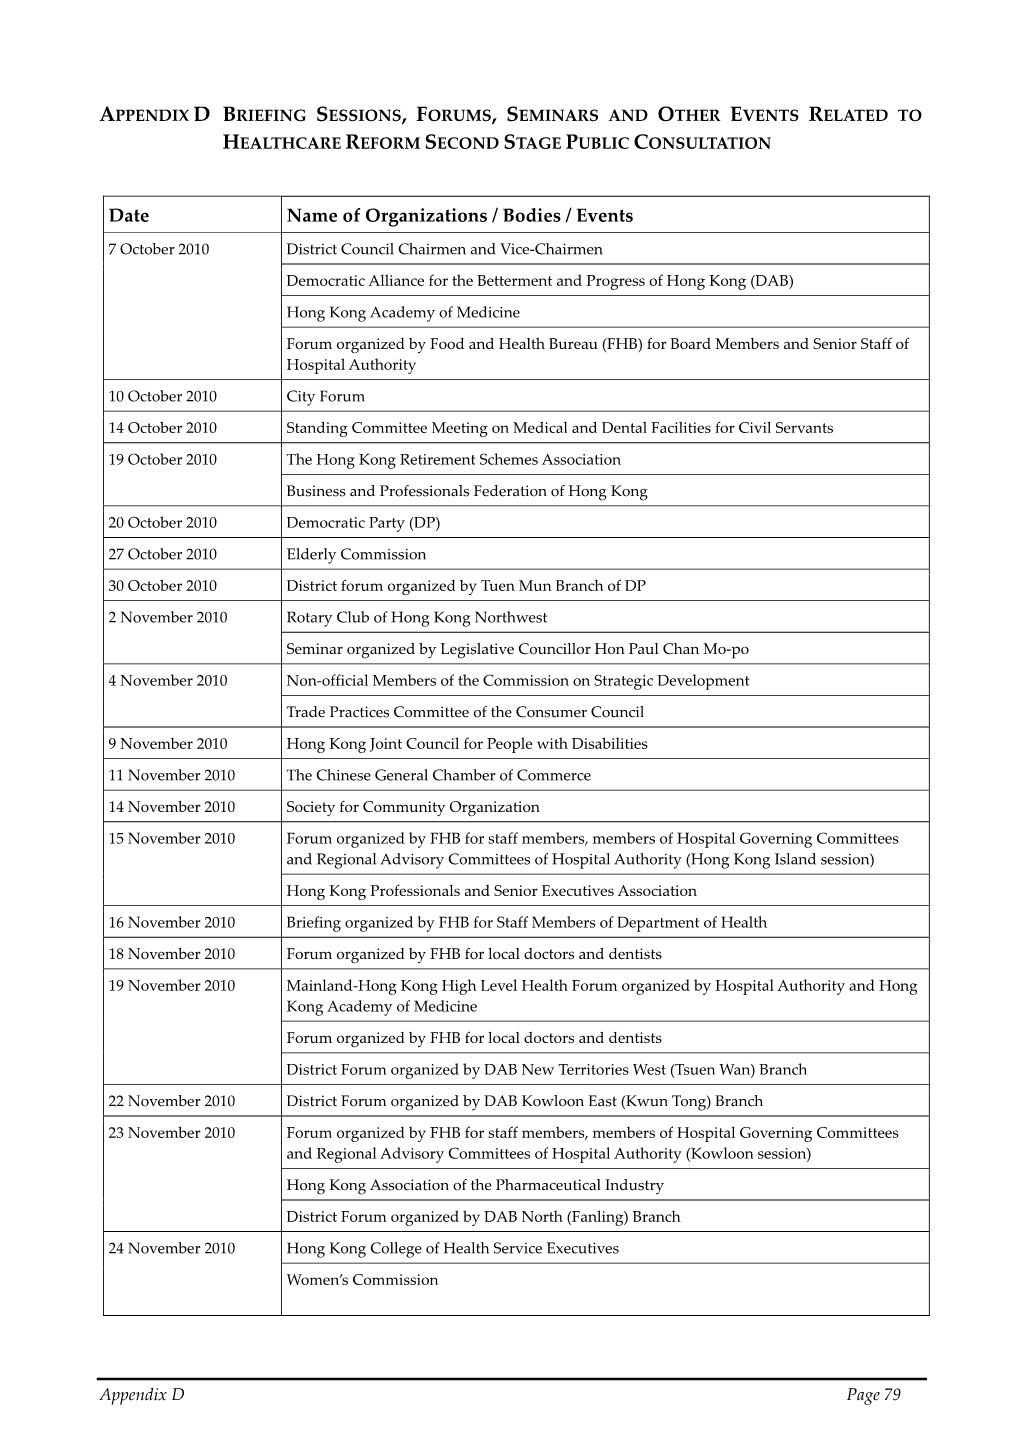 Appendix D Briefing Sessions, Forums, Seminars and Other Events Related to Healthcare Reform Second Stage Public Consultation